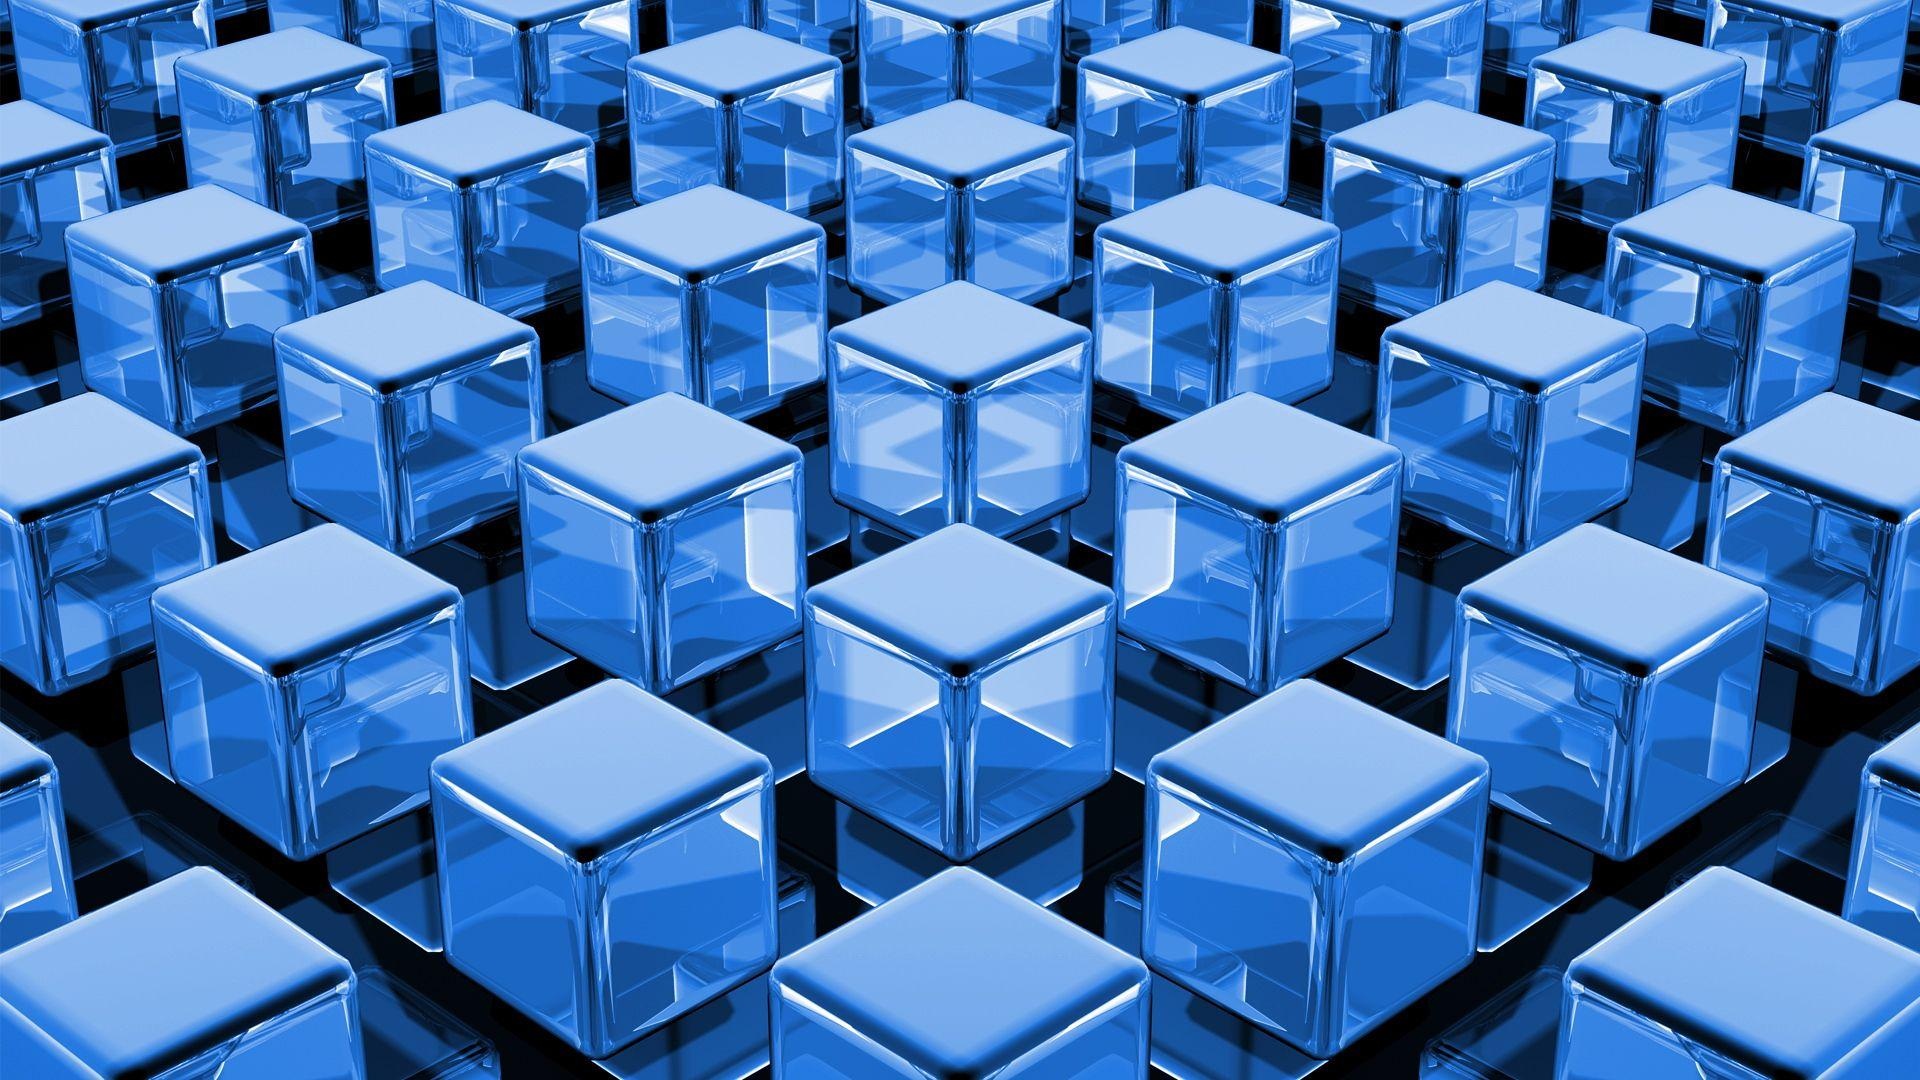 3D cubes wallpapers, Abstract, Geometric, Colorful, 1920x1080 Full HD Desktop